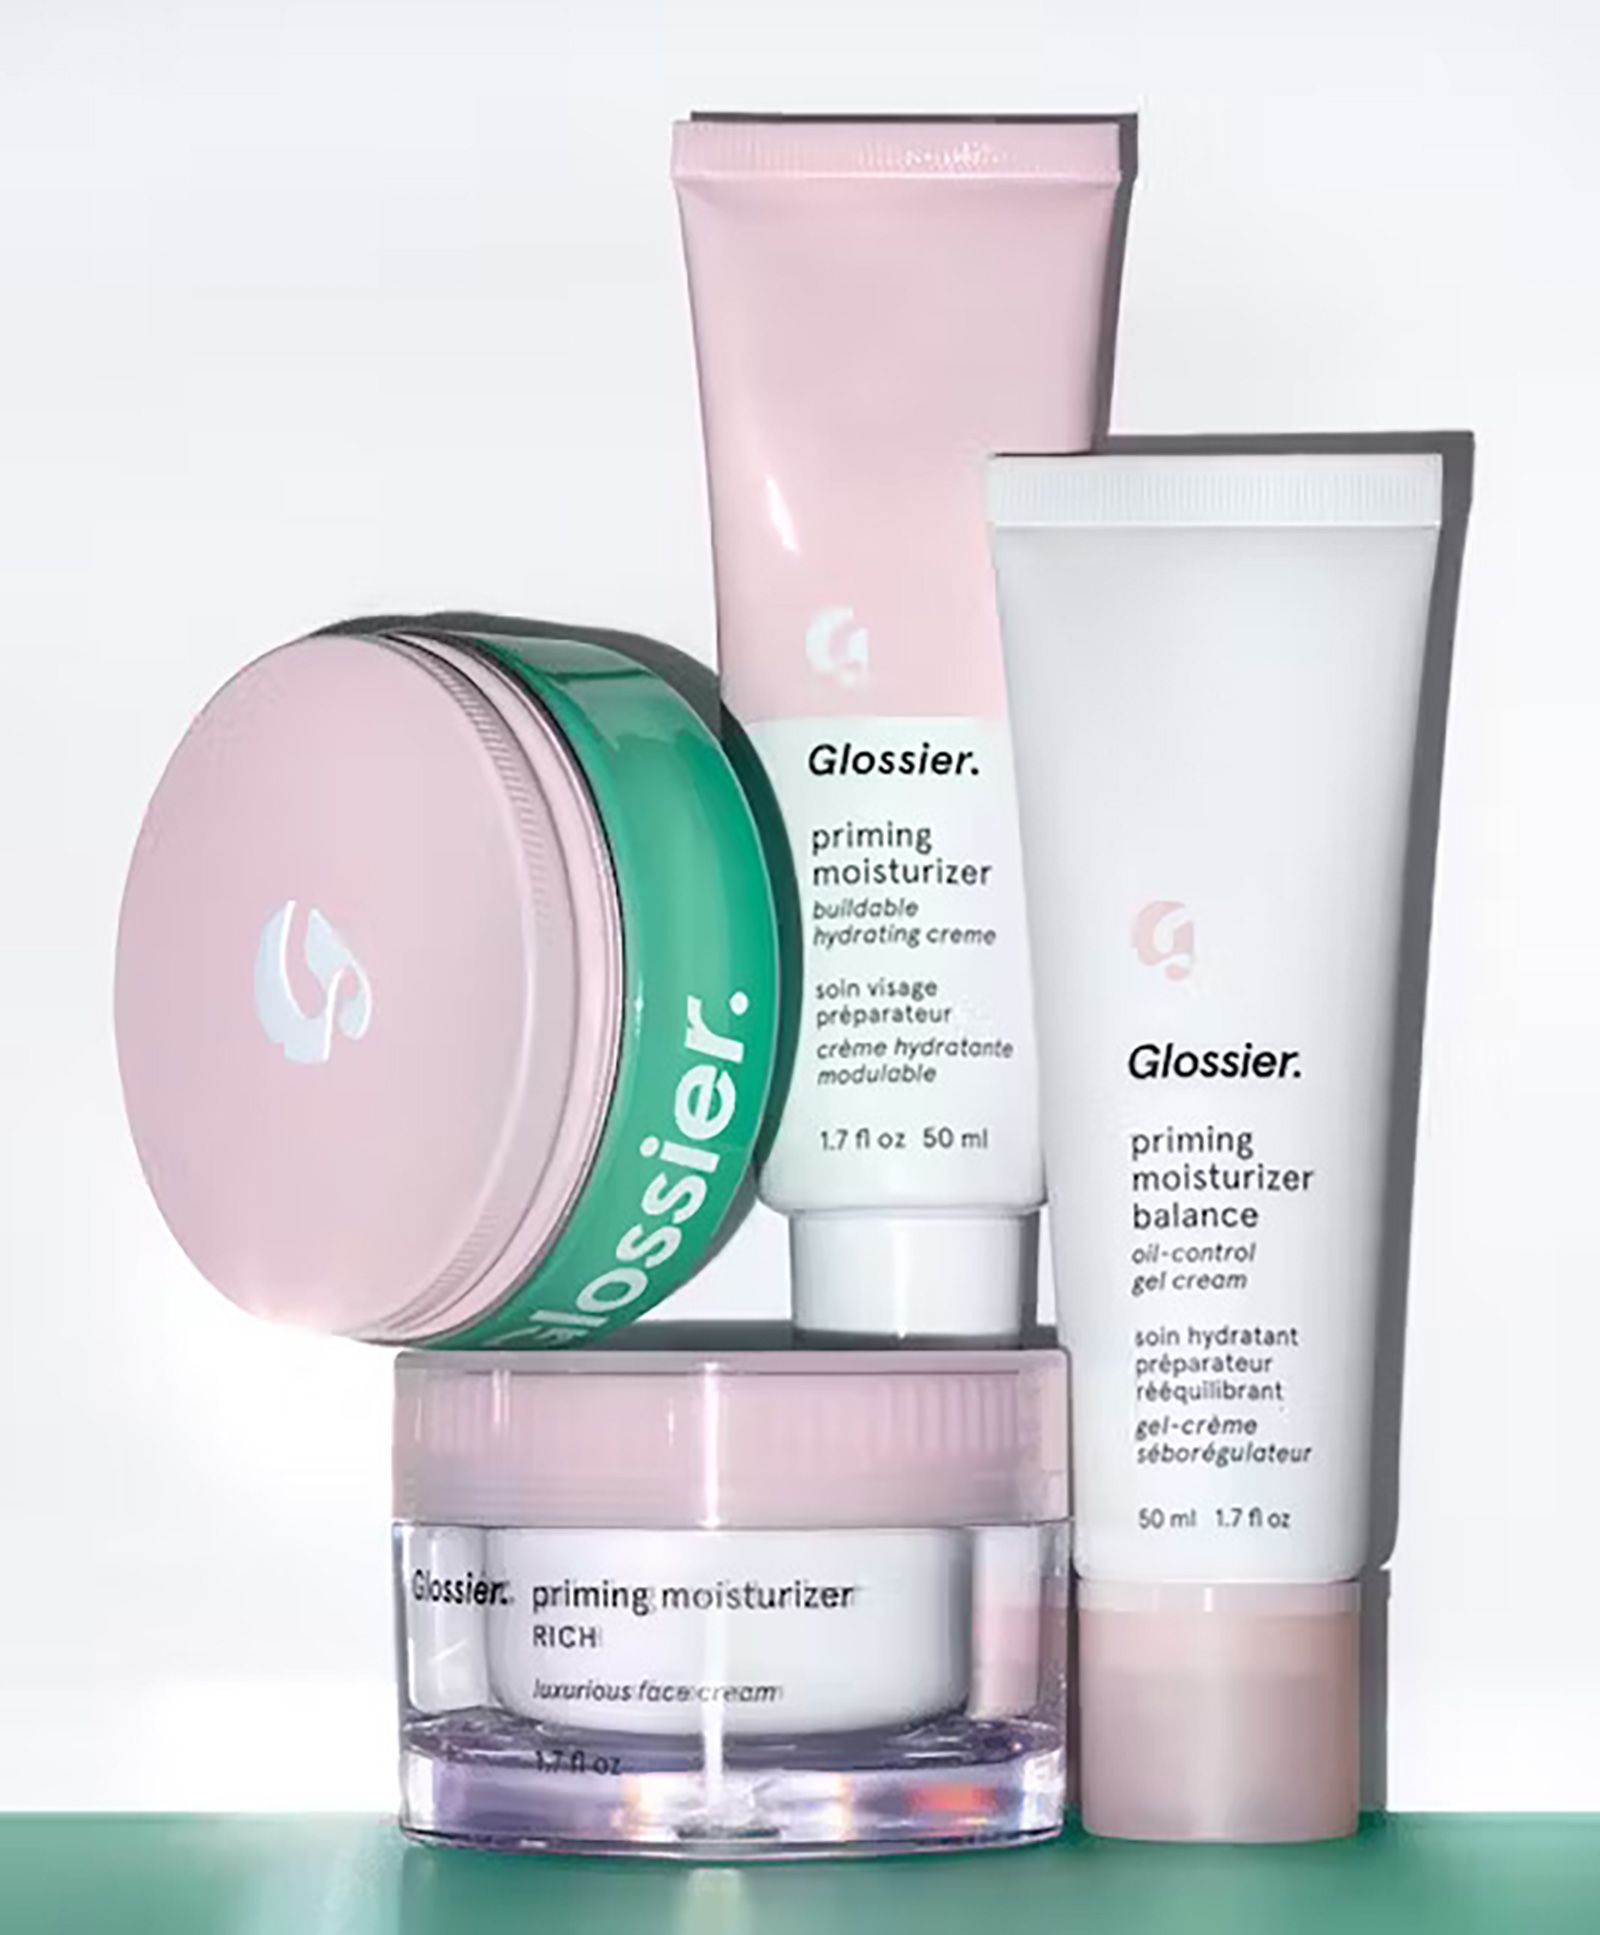 Tell-all book lifts the lid on troubled beauty brand Glossier